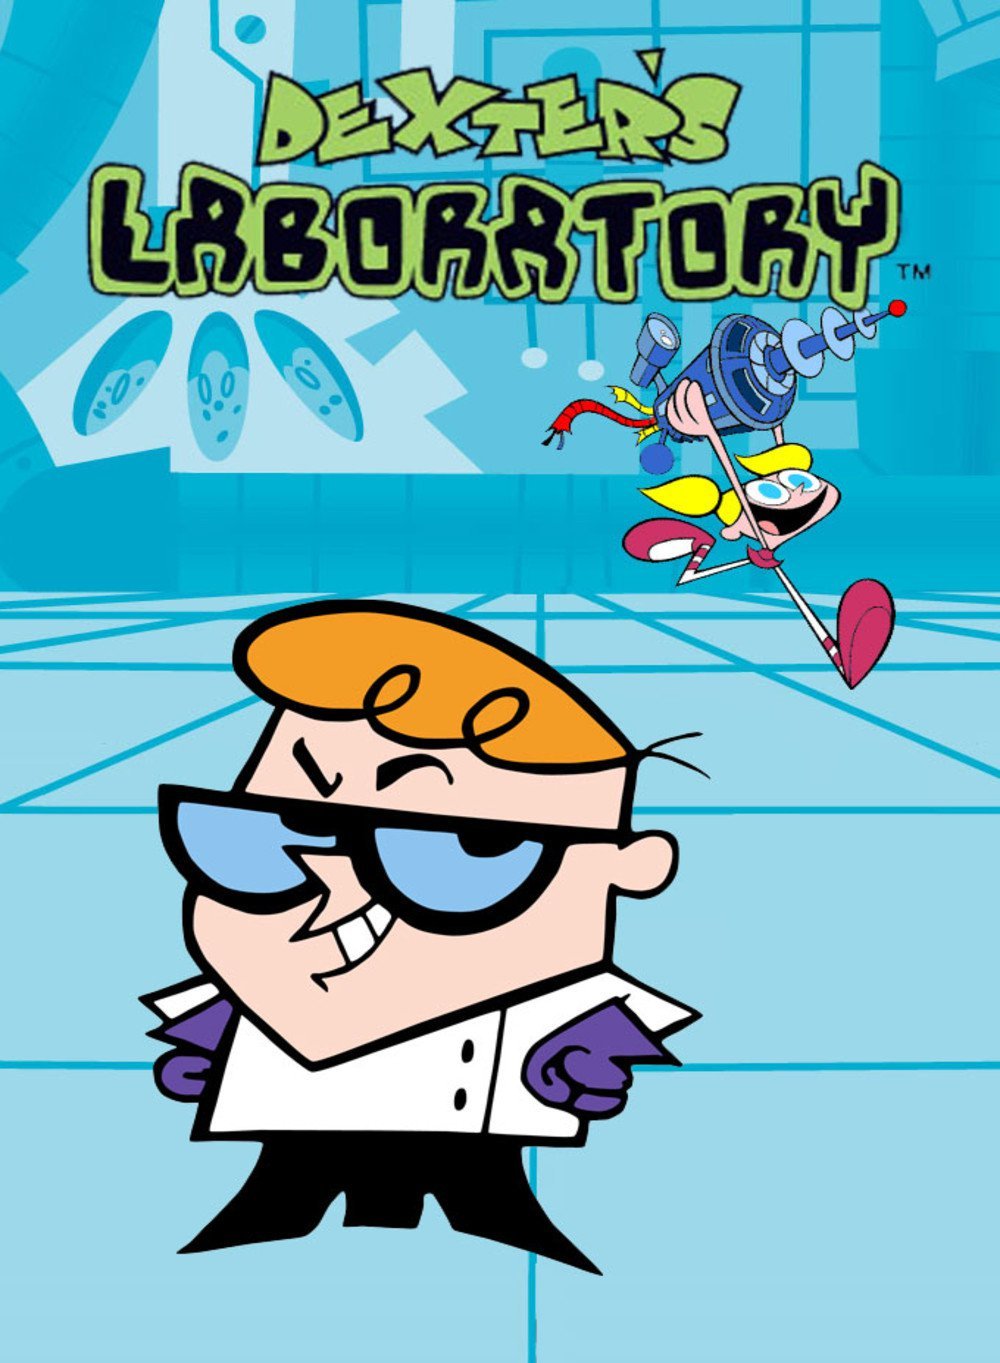 Get the Details on the New Dexters Laboratory Comic - IGN